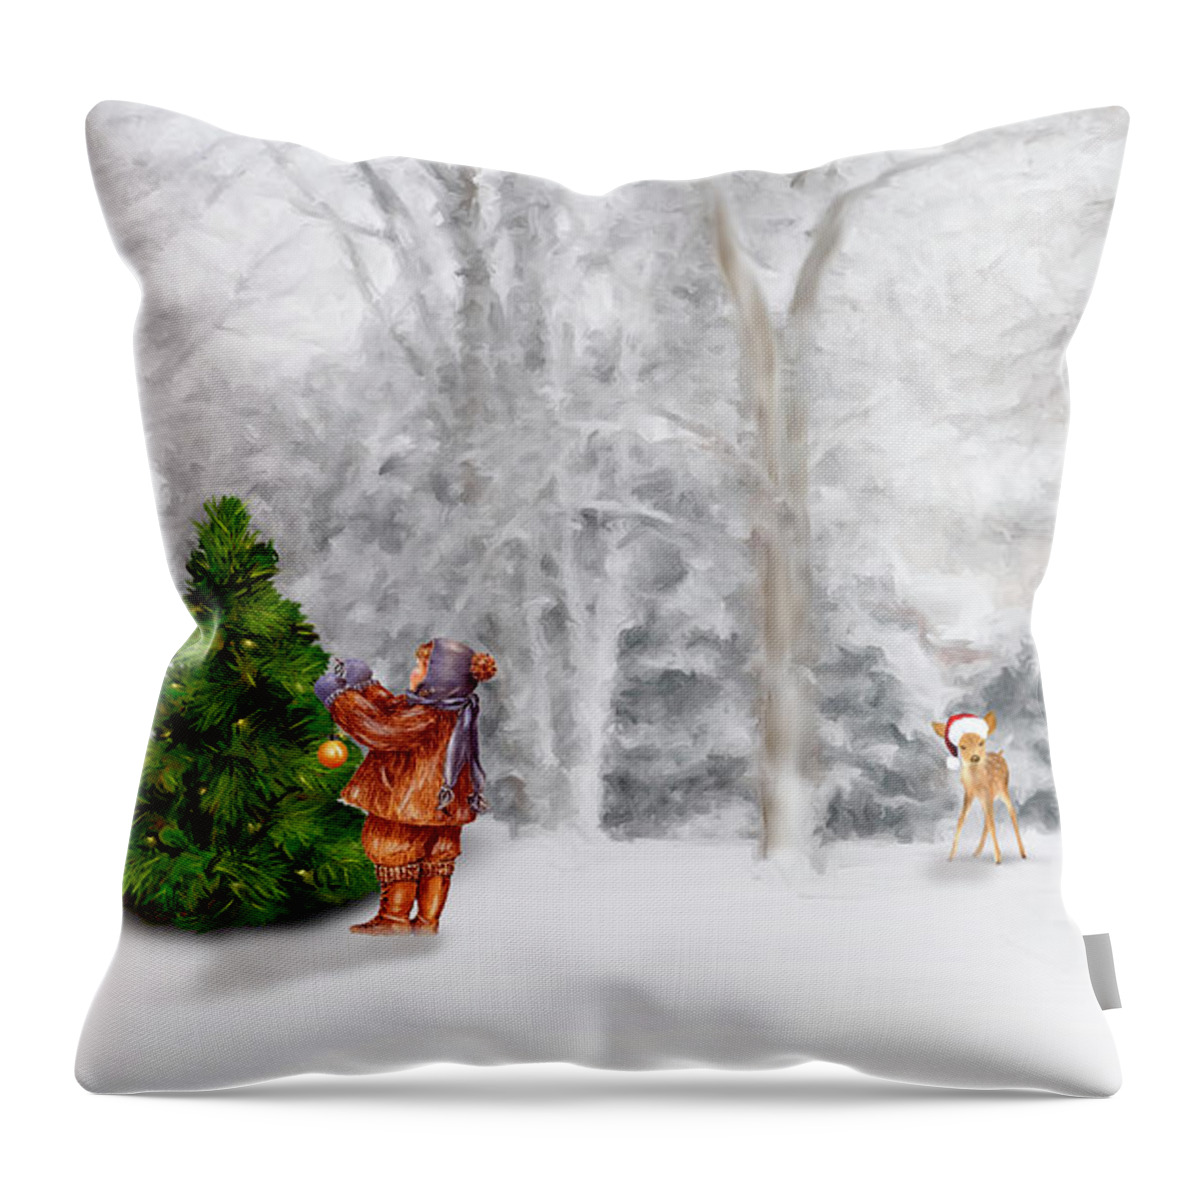 Christmas Tree Throw Pillow featuring the photograph Oh Christmas Tree by Mary Timman